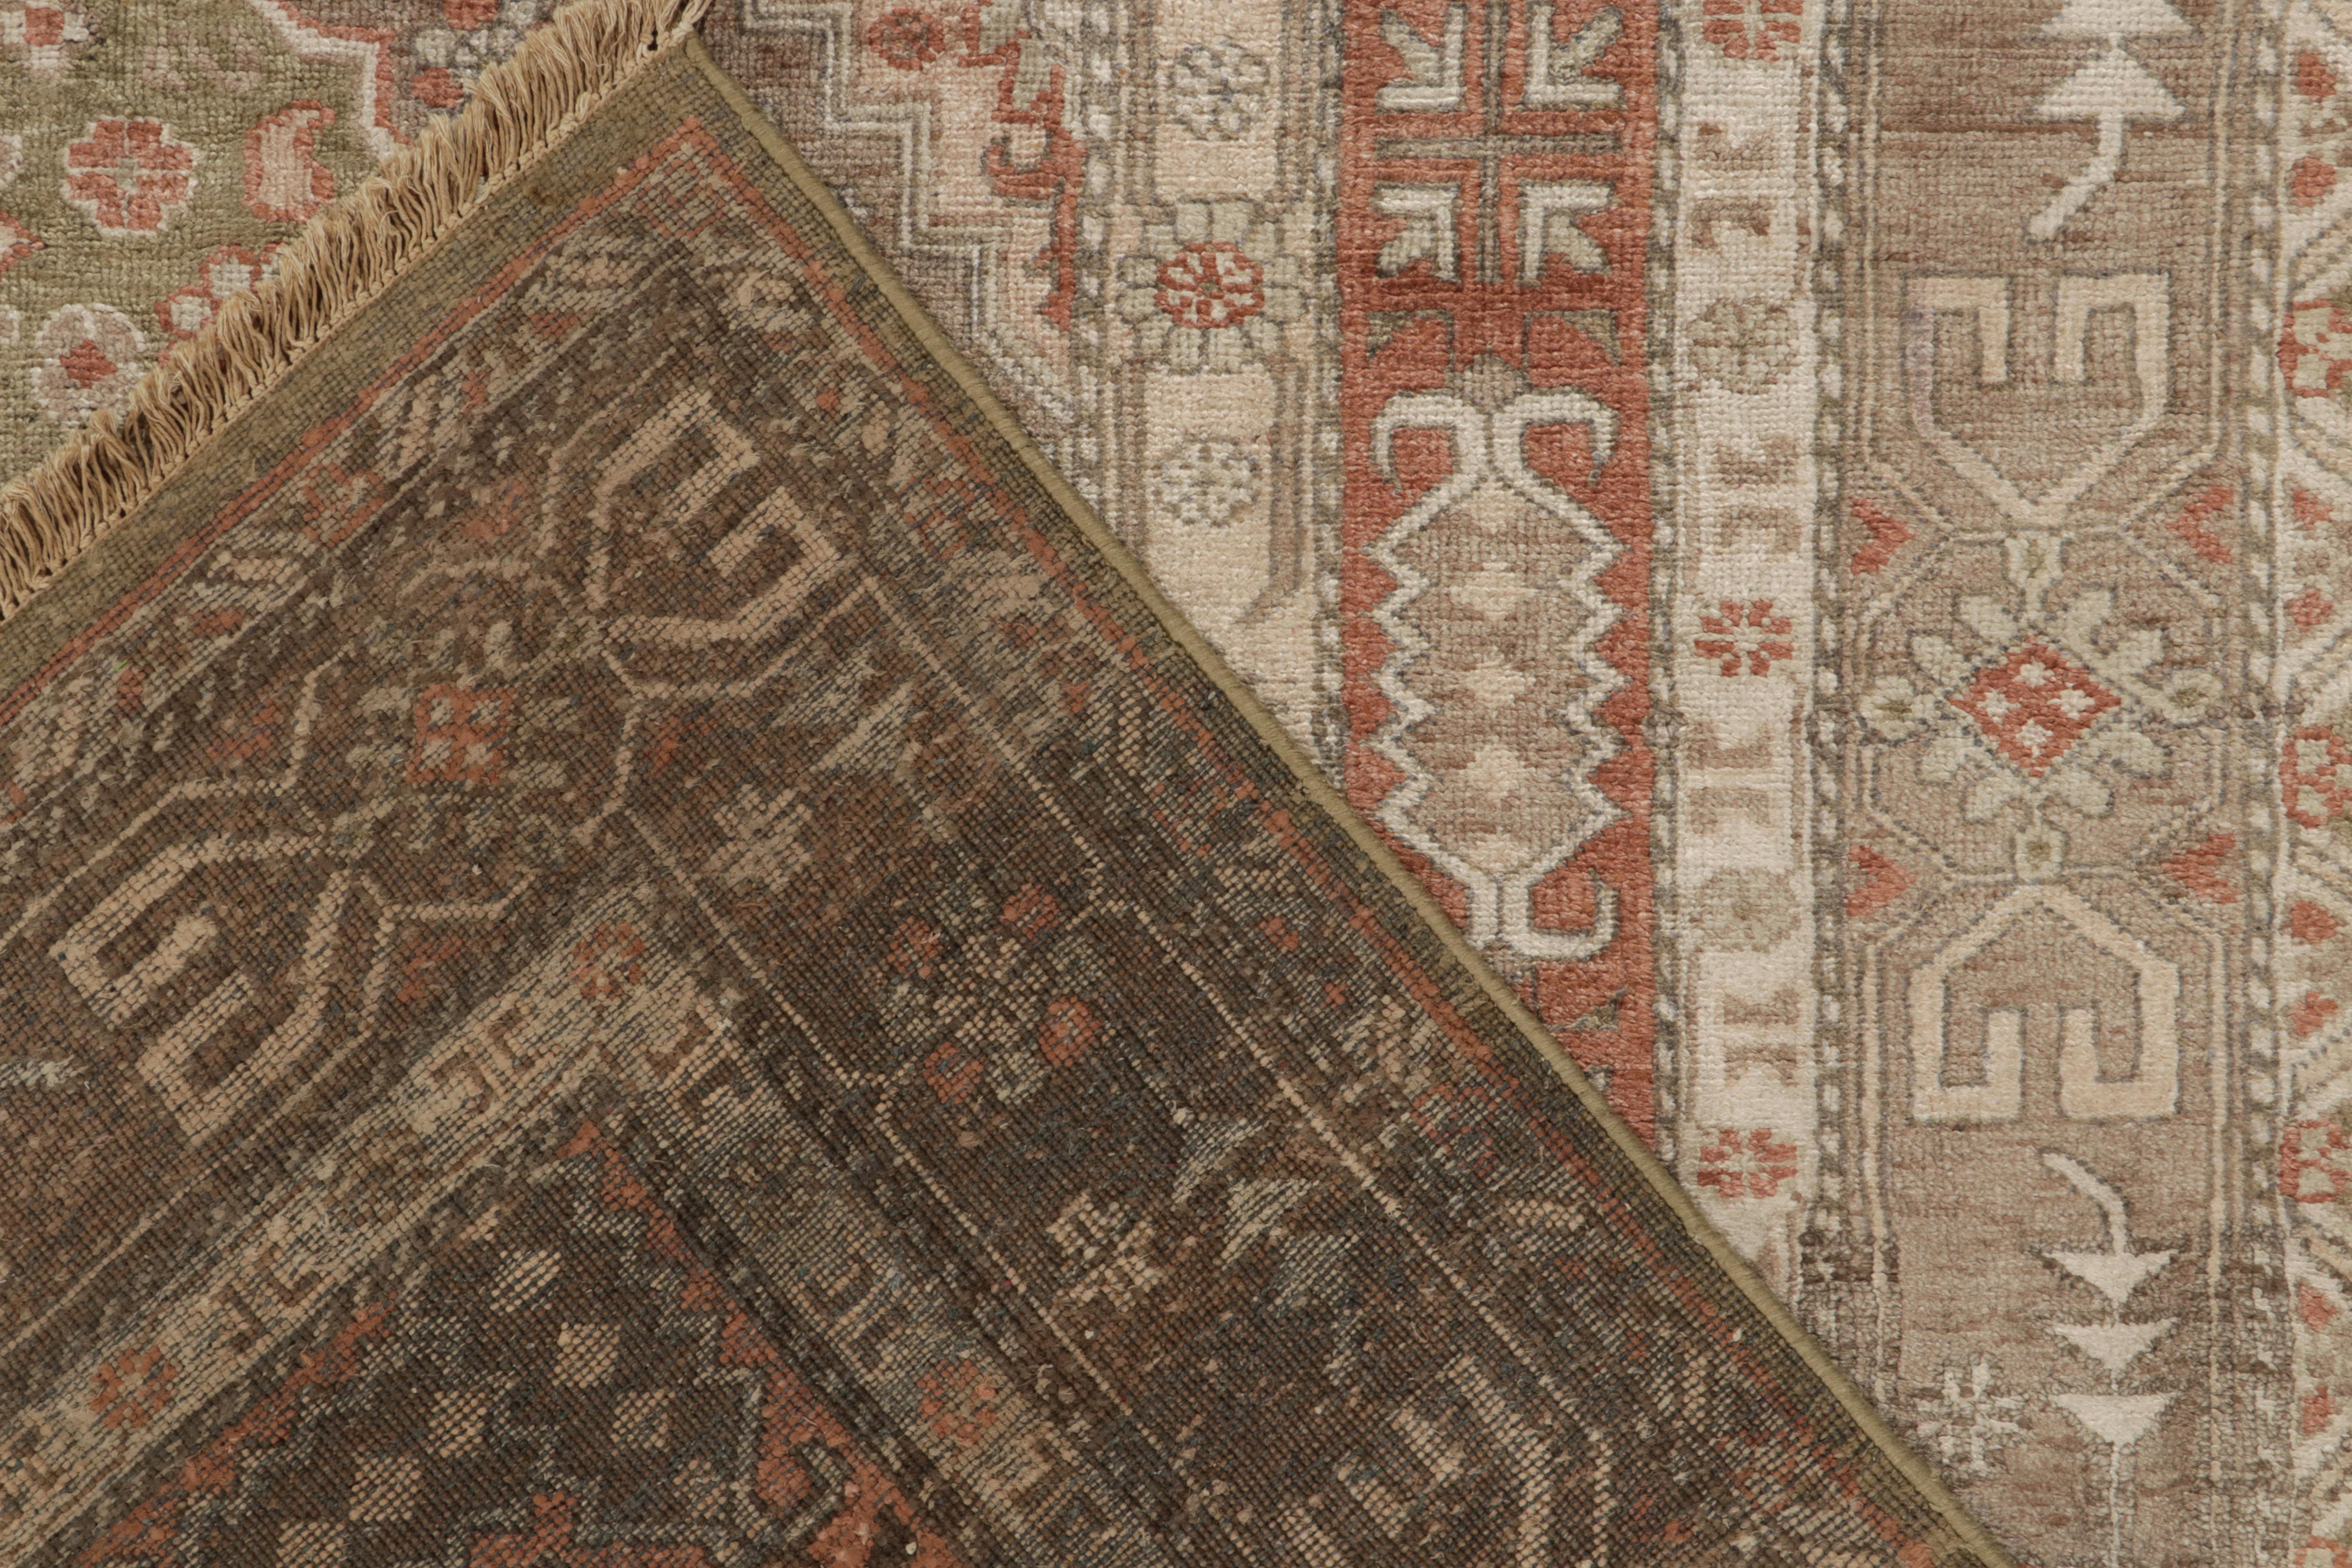 Silk Rug & Kilim’s Classic Khotan Style Rug in Beige, Rust and Ivory Floral Patterns For Sale